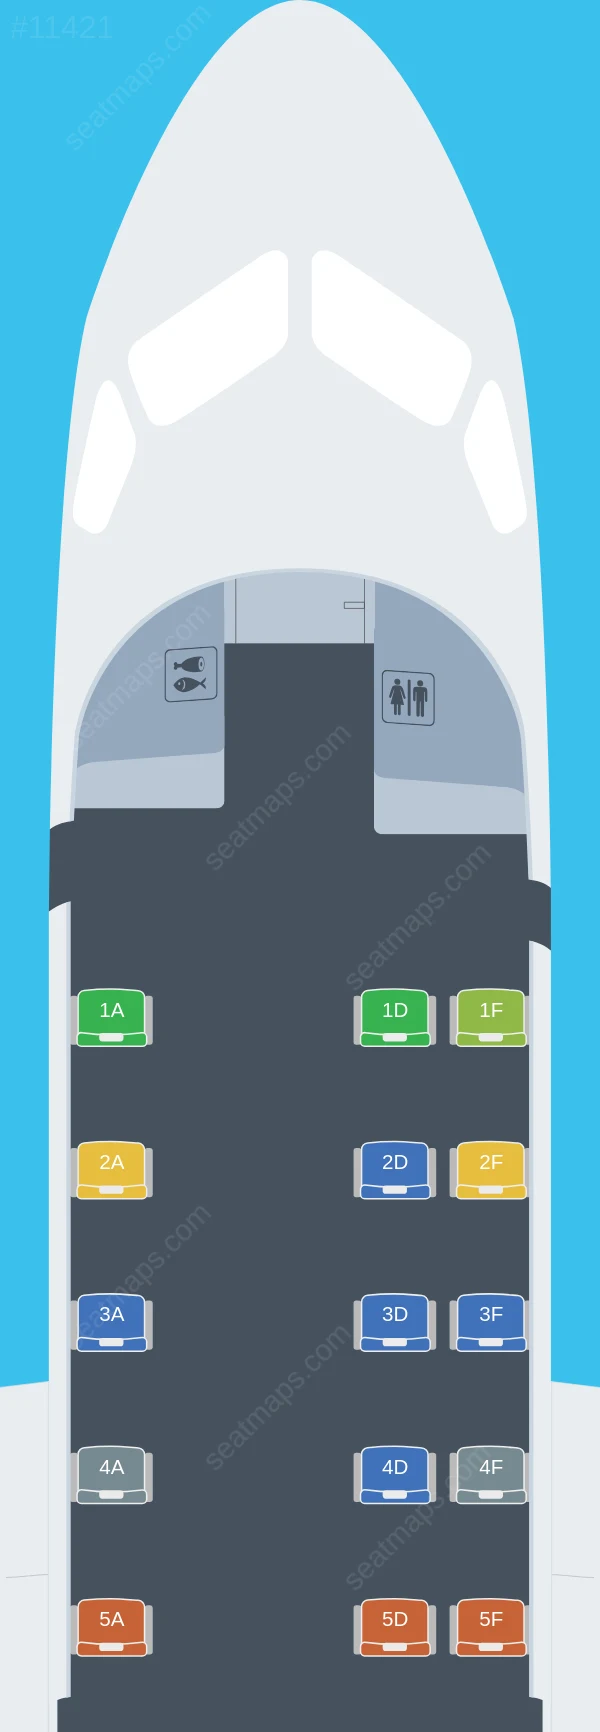 Southern Airways Express Saab S340 seatmap preview